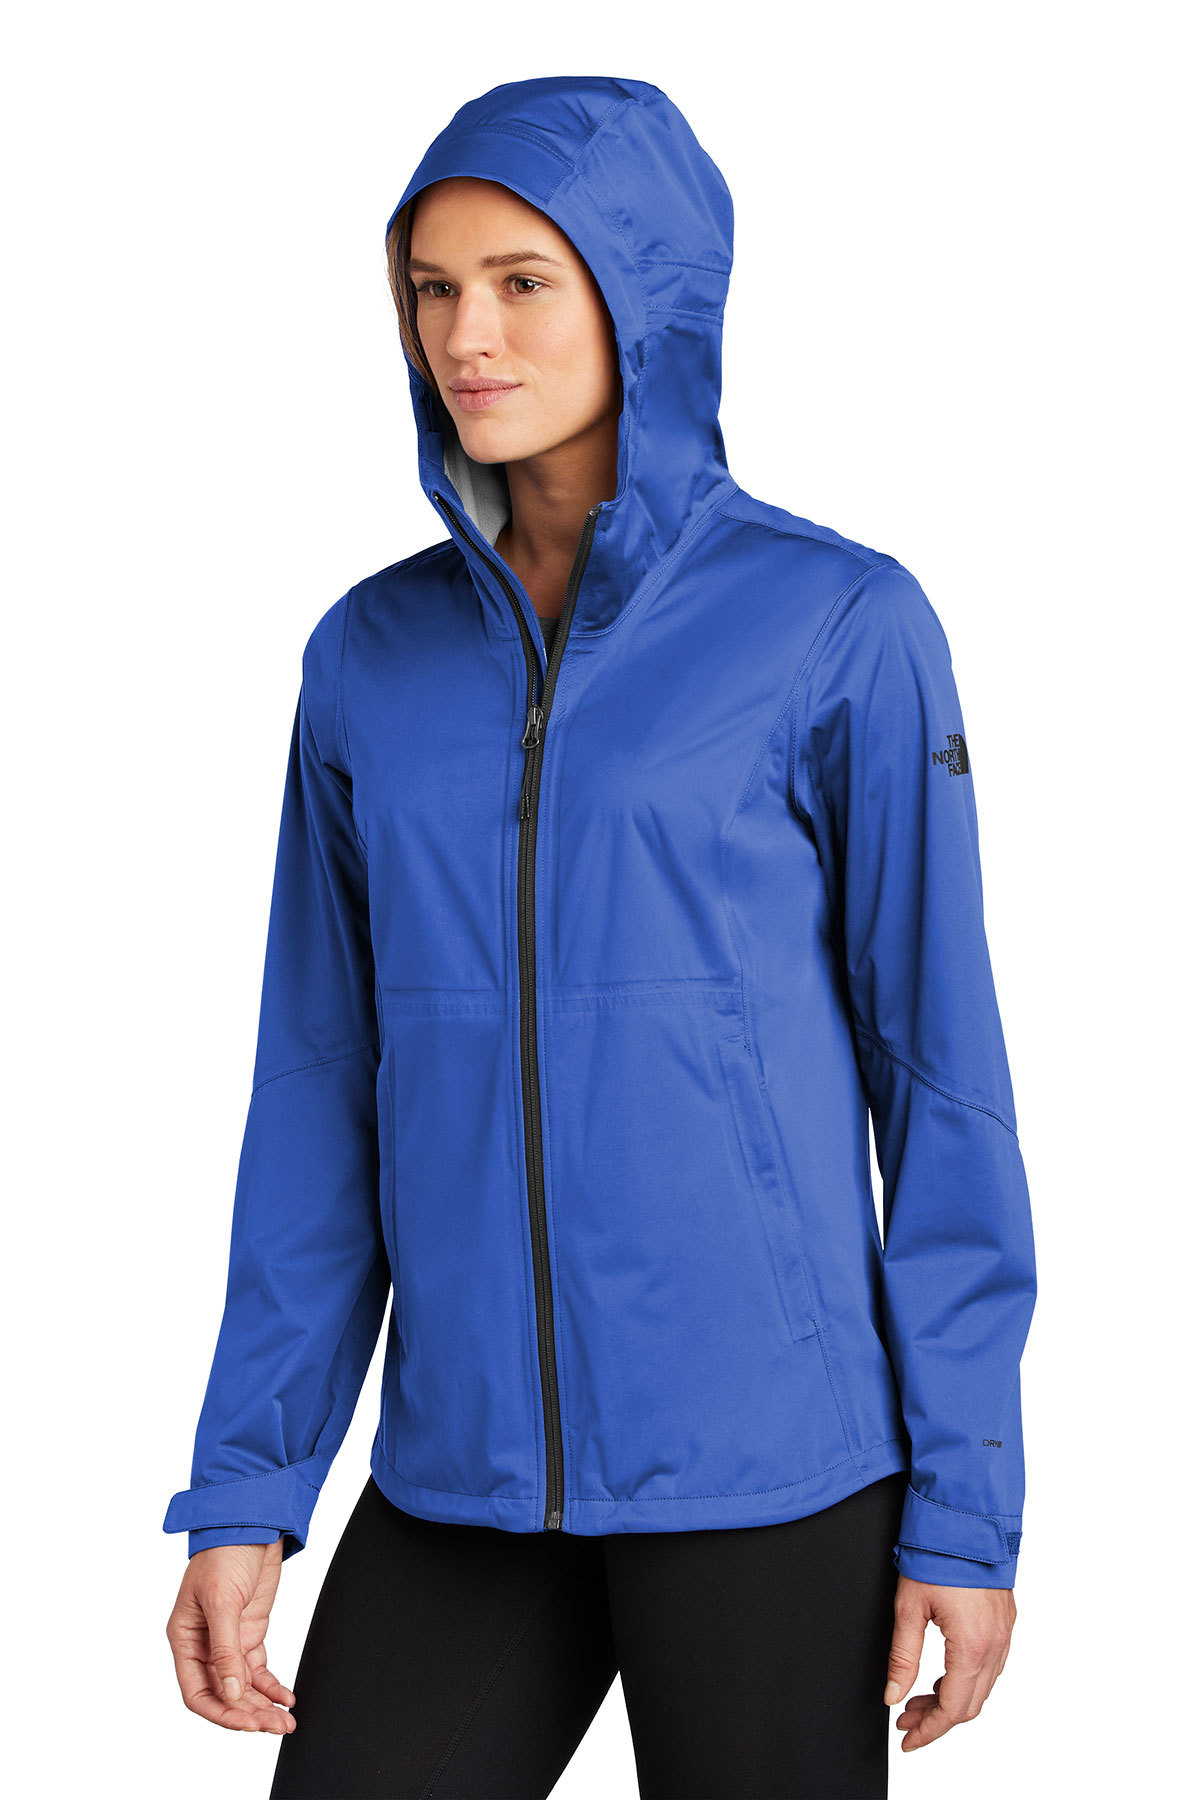 north face all weather jacket